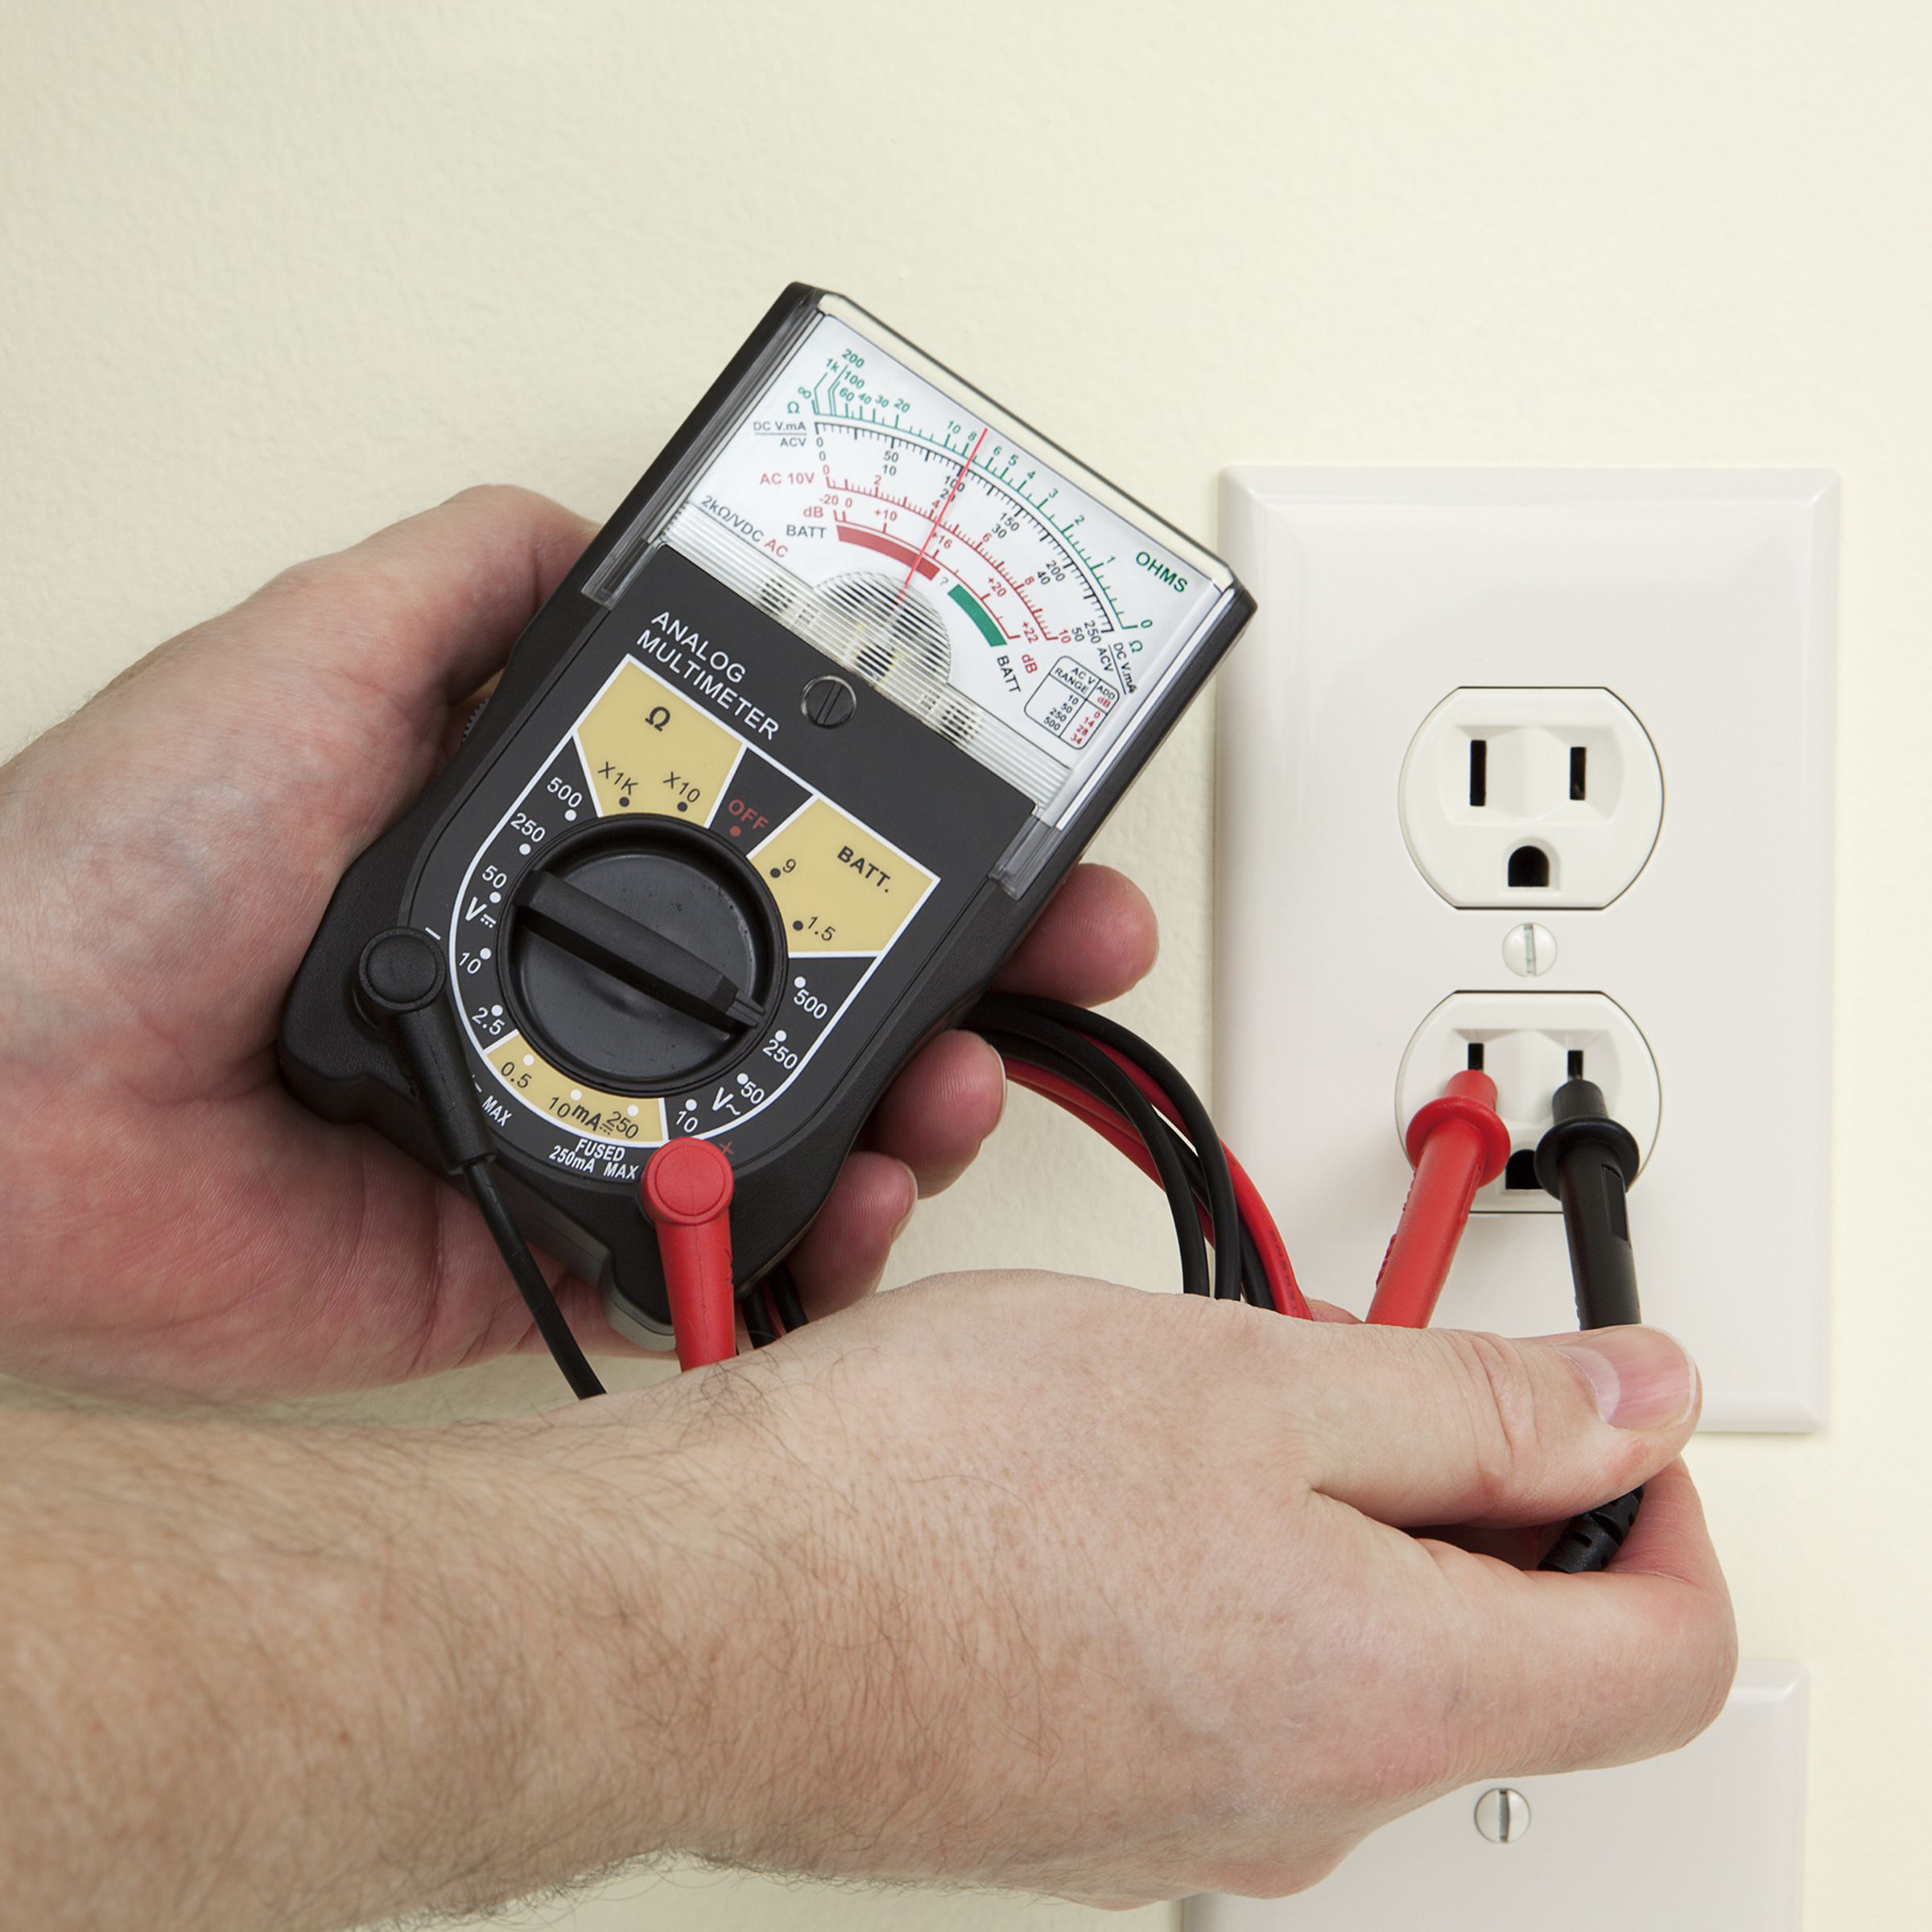 Testing an outlet with a multimeter